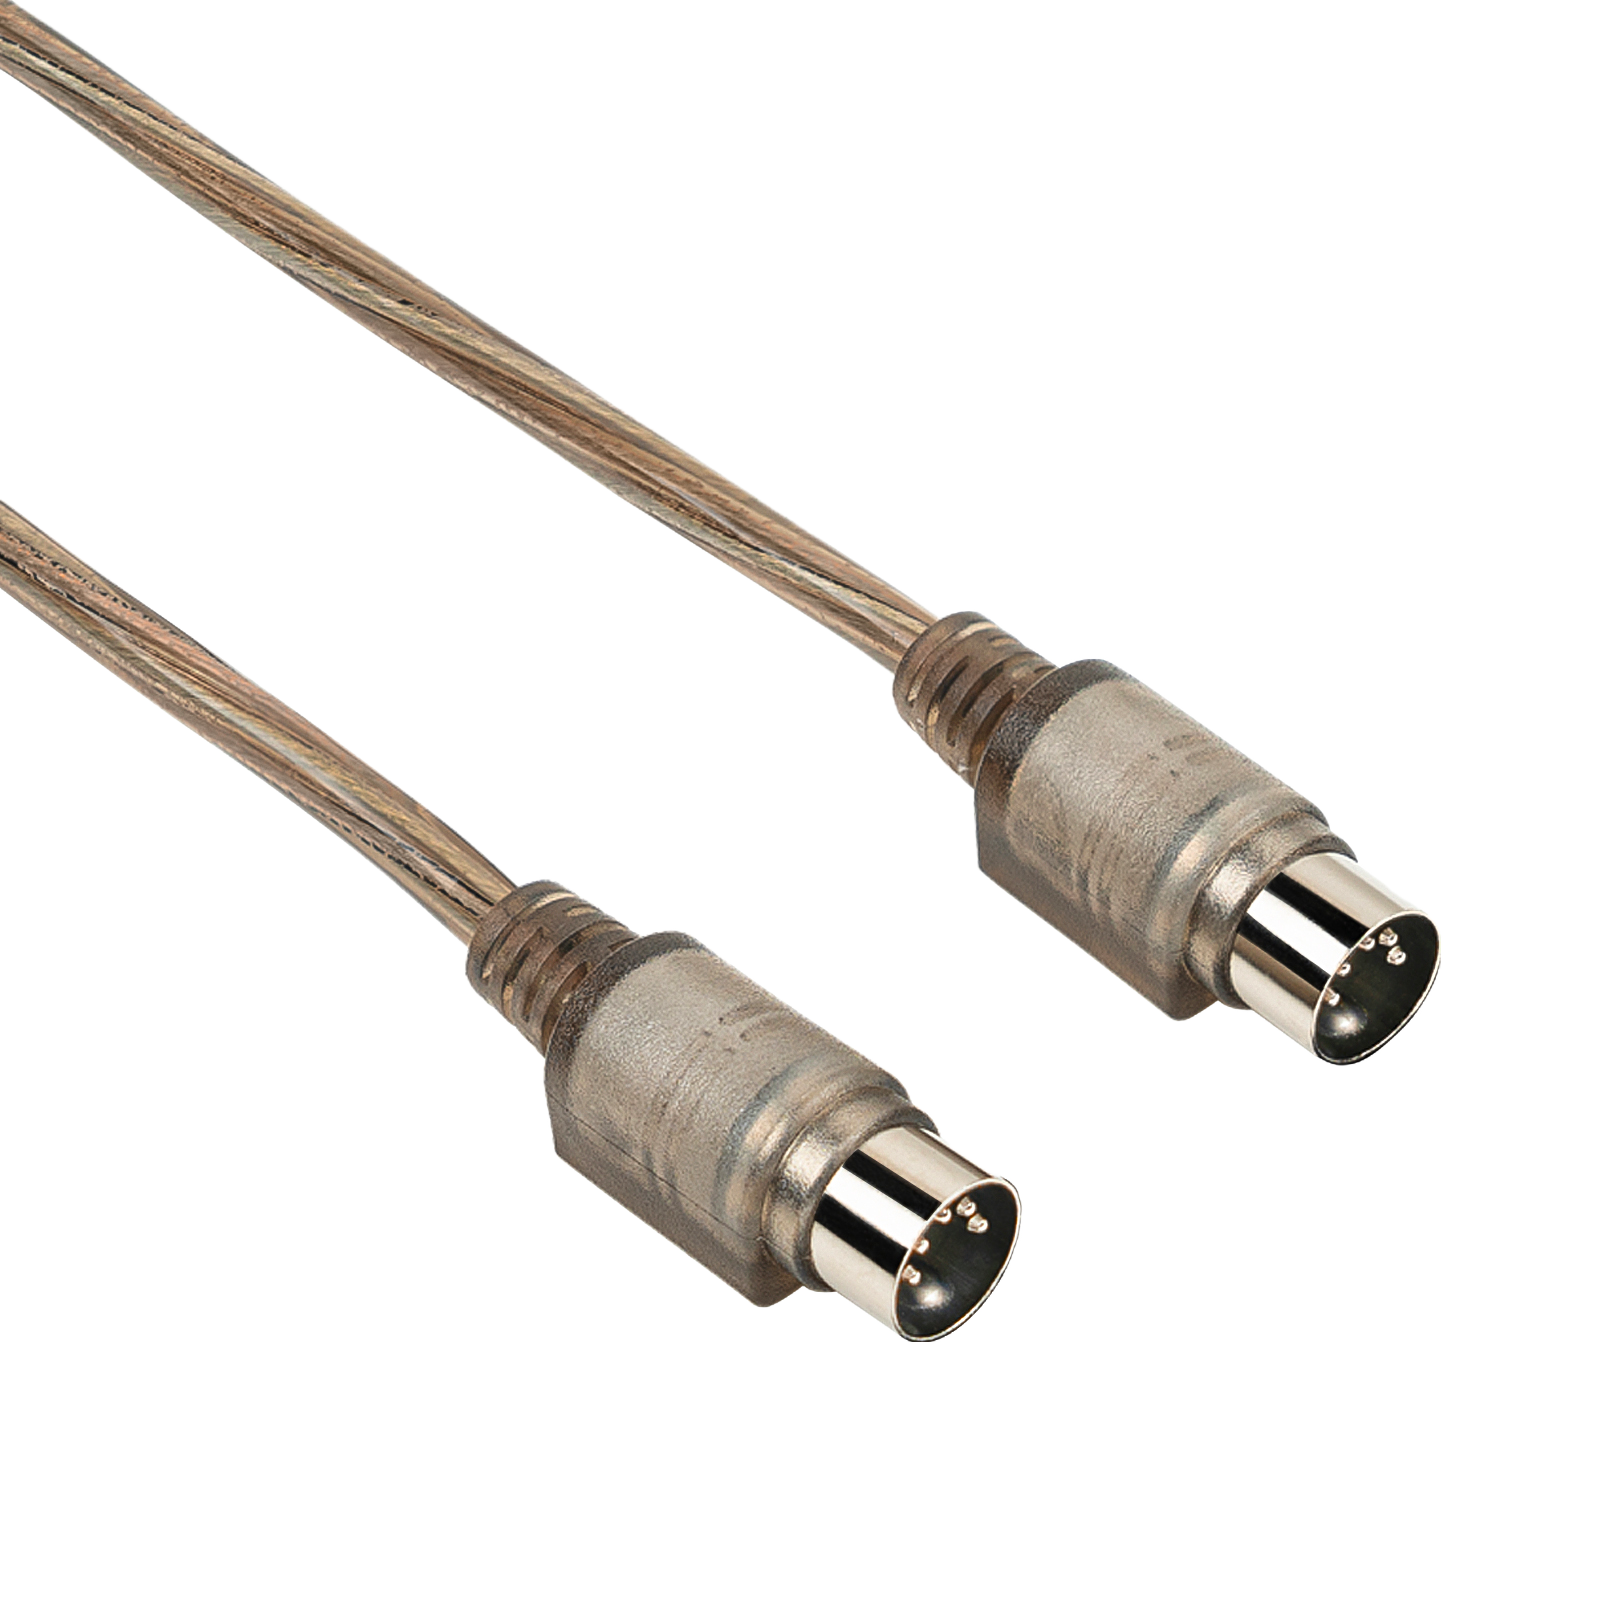 MAC7 Speaker Cable for R2000DB / S1000DB